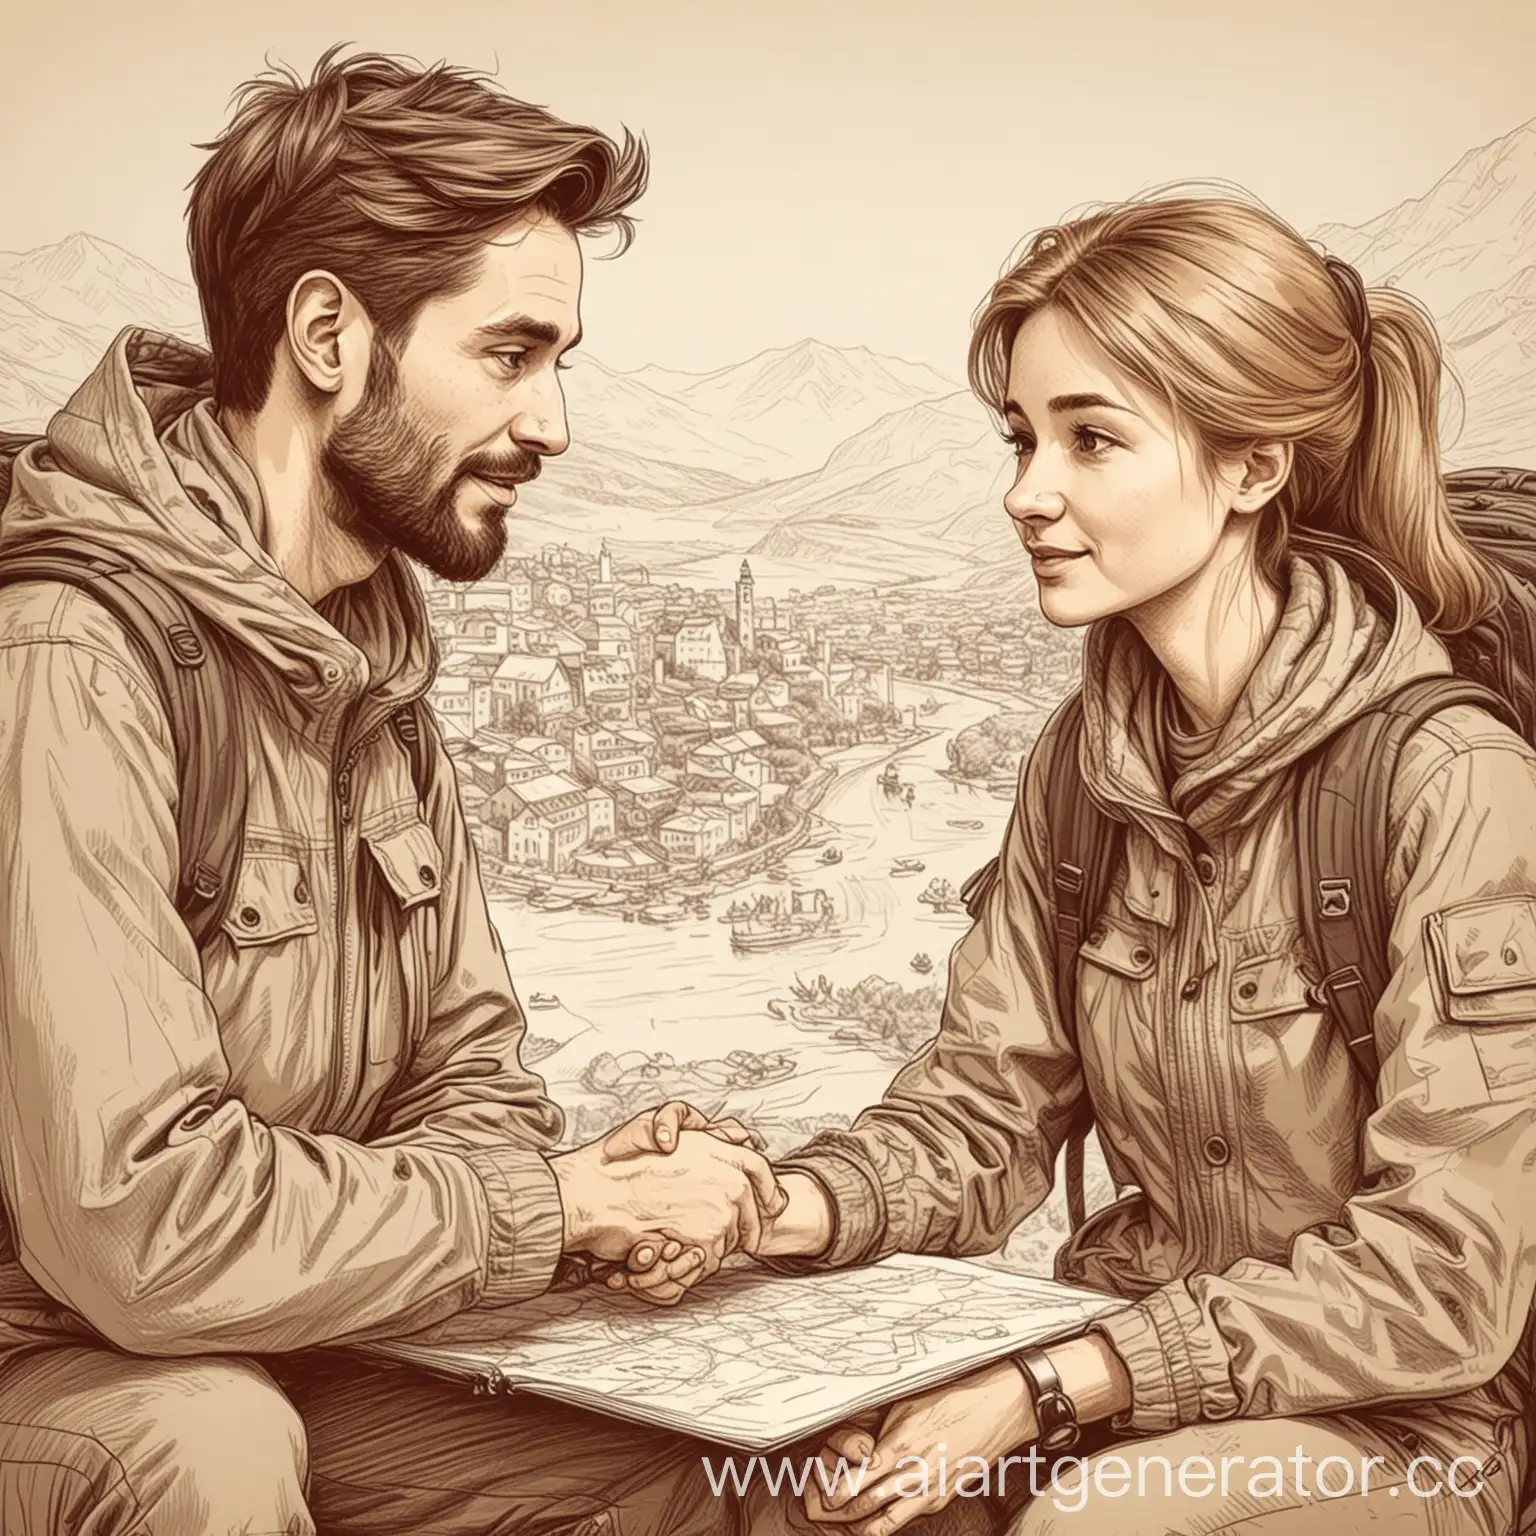 Illustration-Engaging-Dialogue-with-a-Seasoned-Explorer